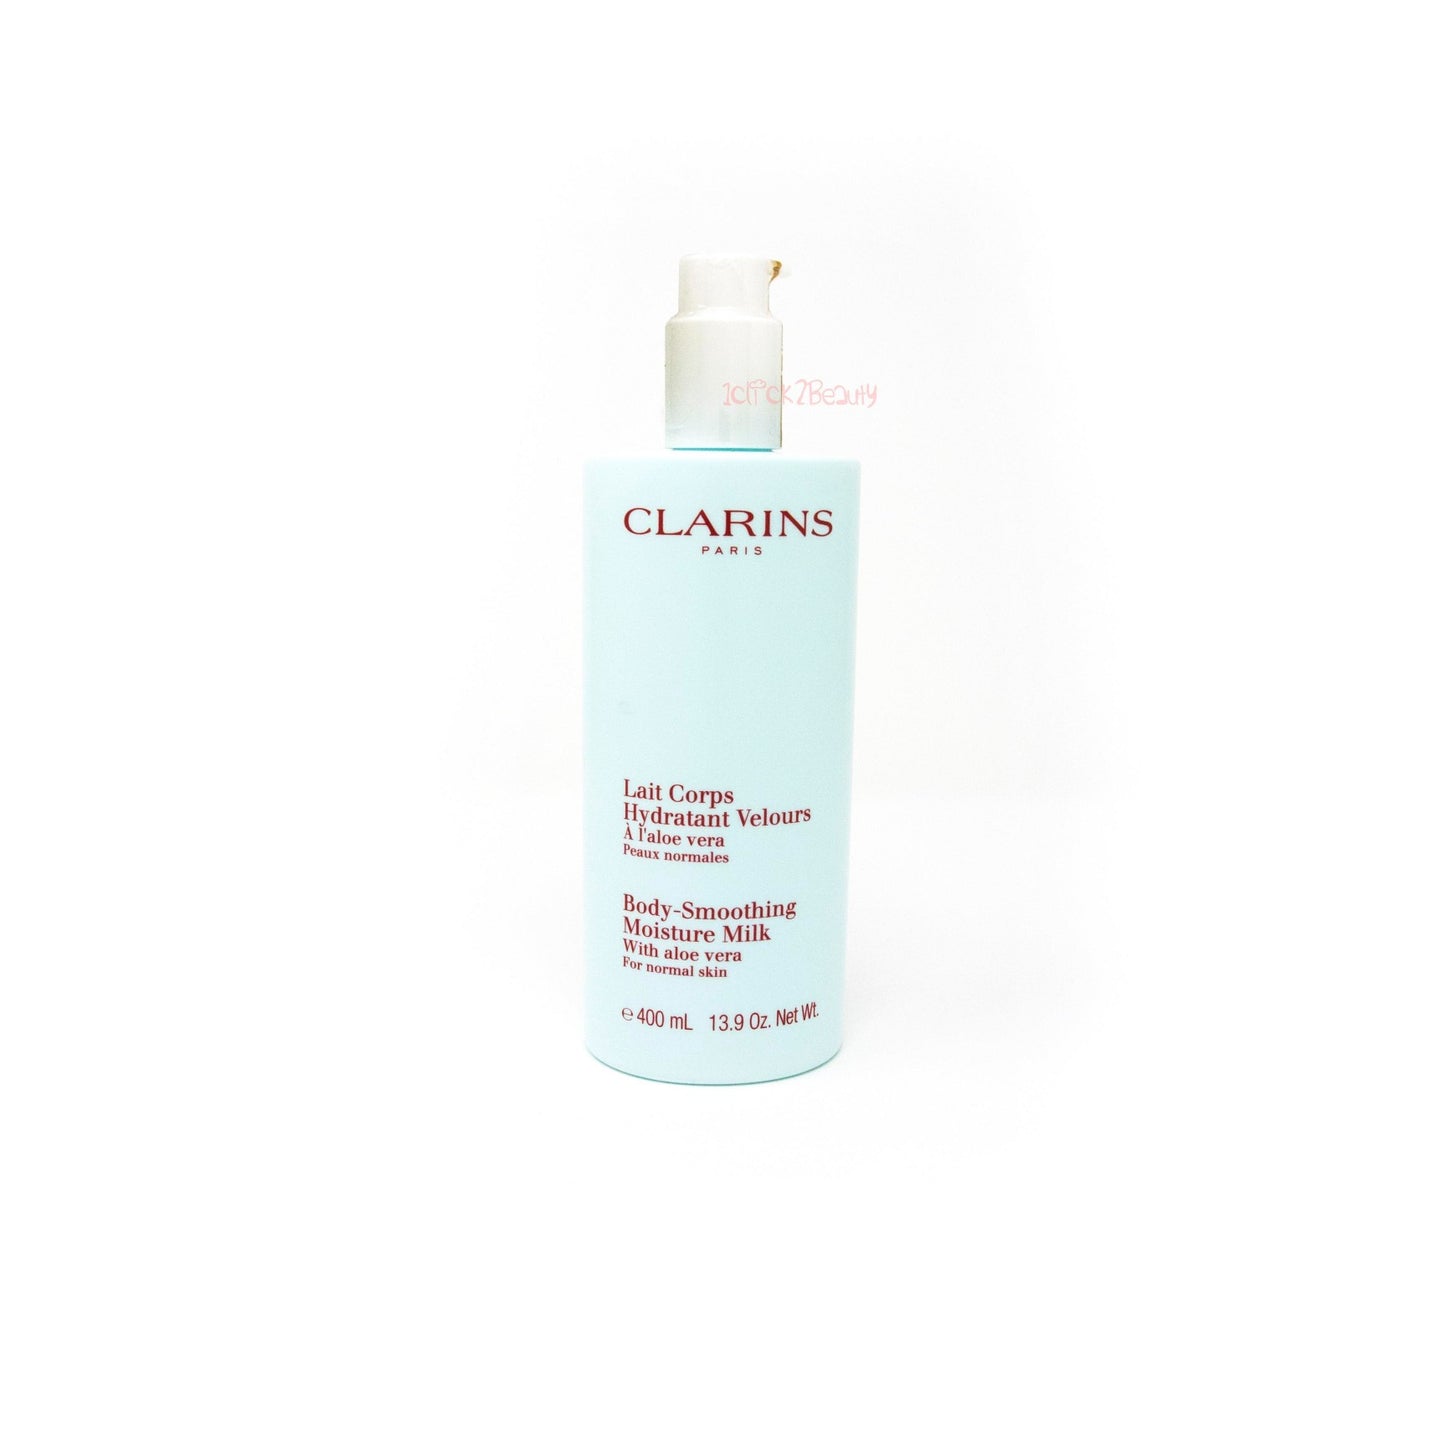 CLARINS BODY-SMOOTHING MOISTURE MILK WITH ALOE VERA FOR NORMAL SKIN  400ML - 1click2beauty